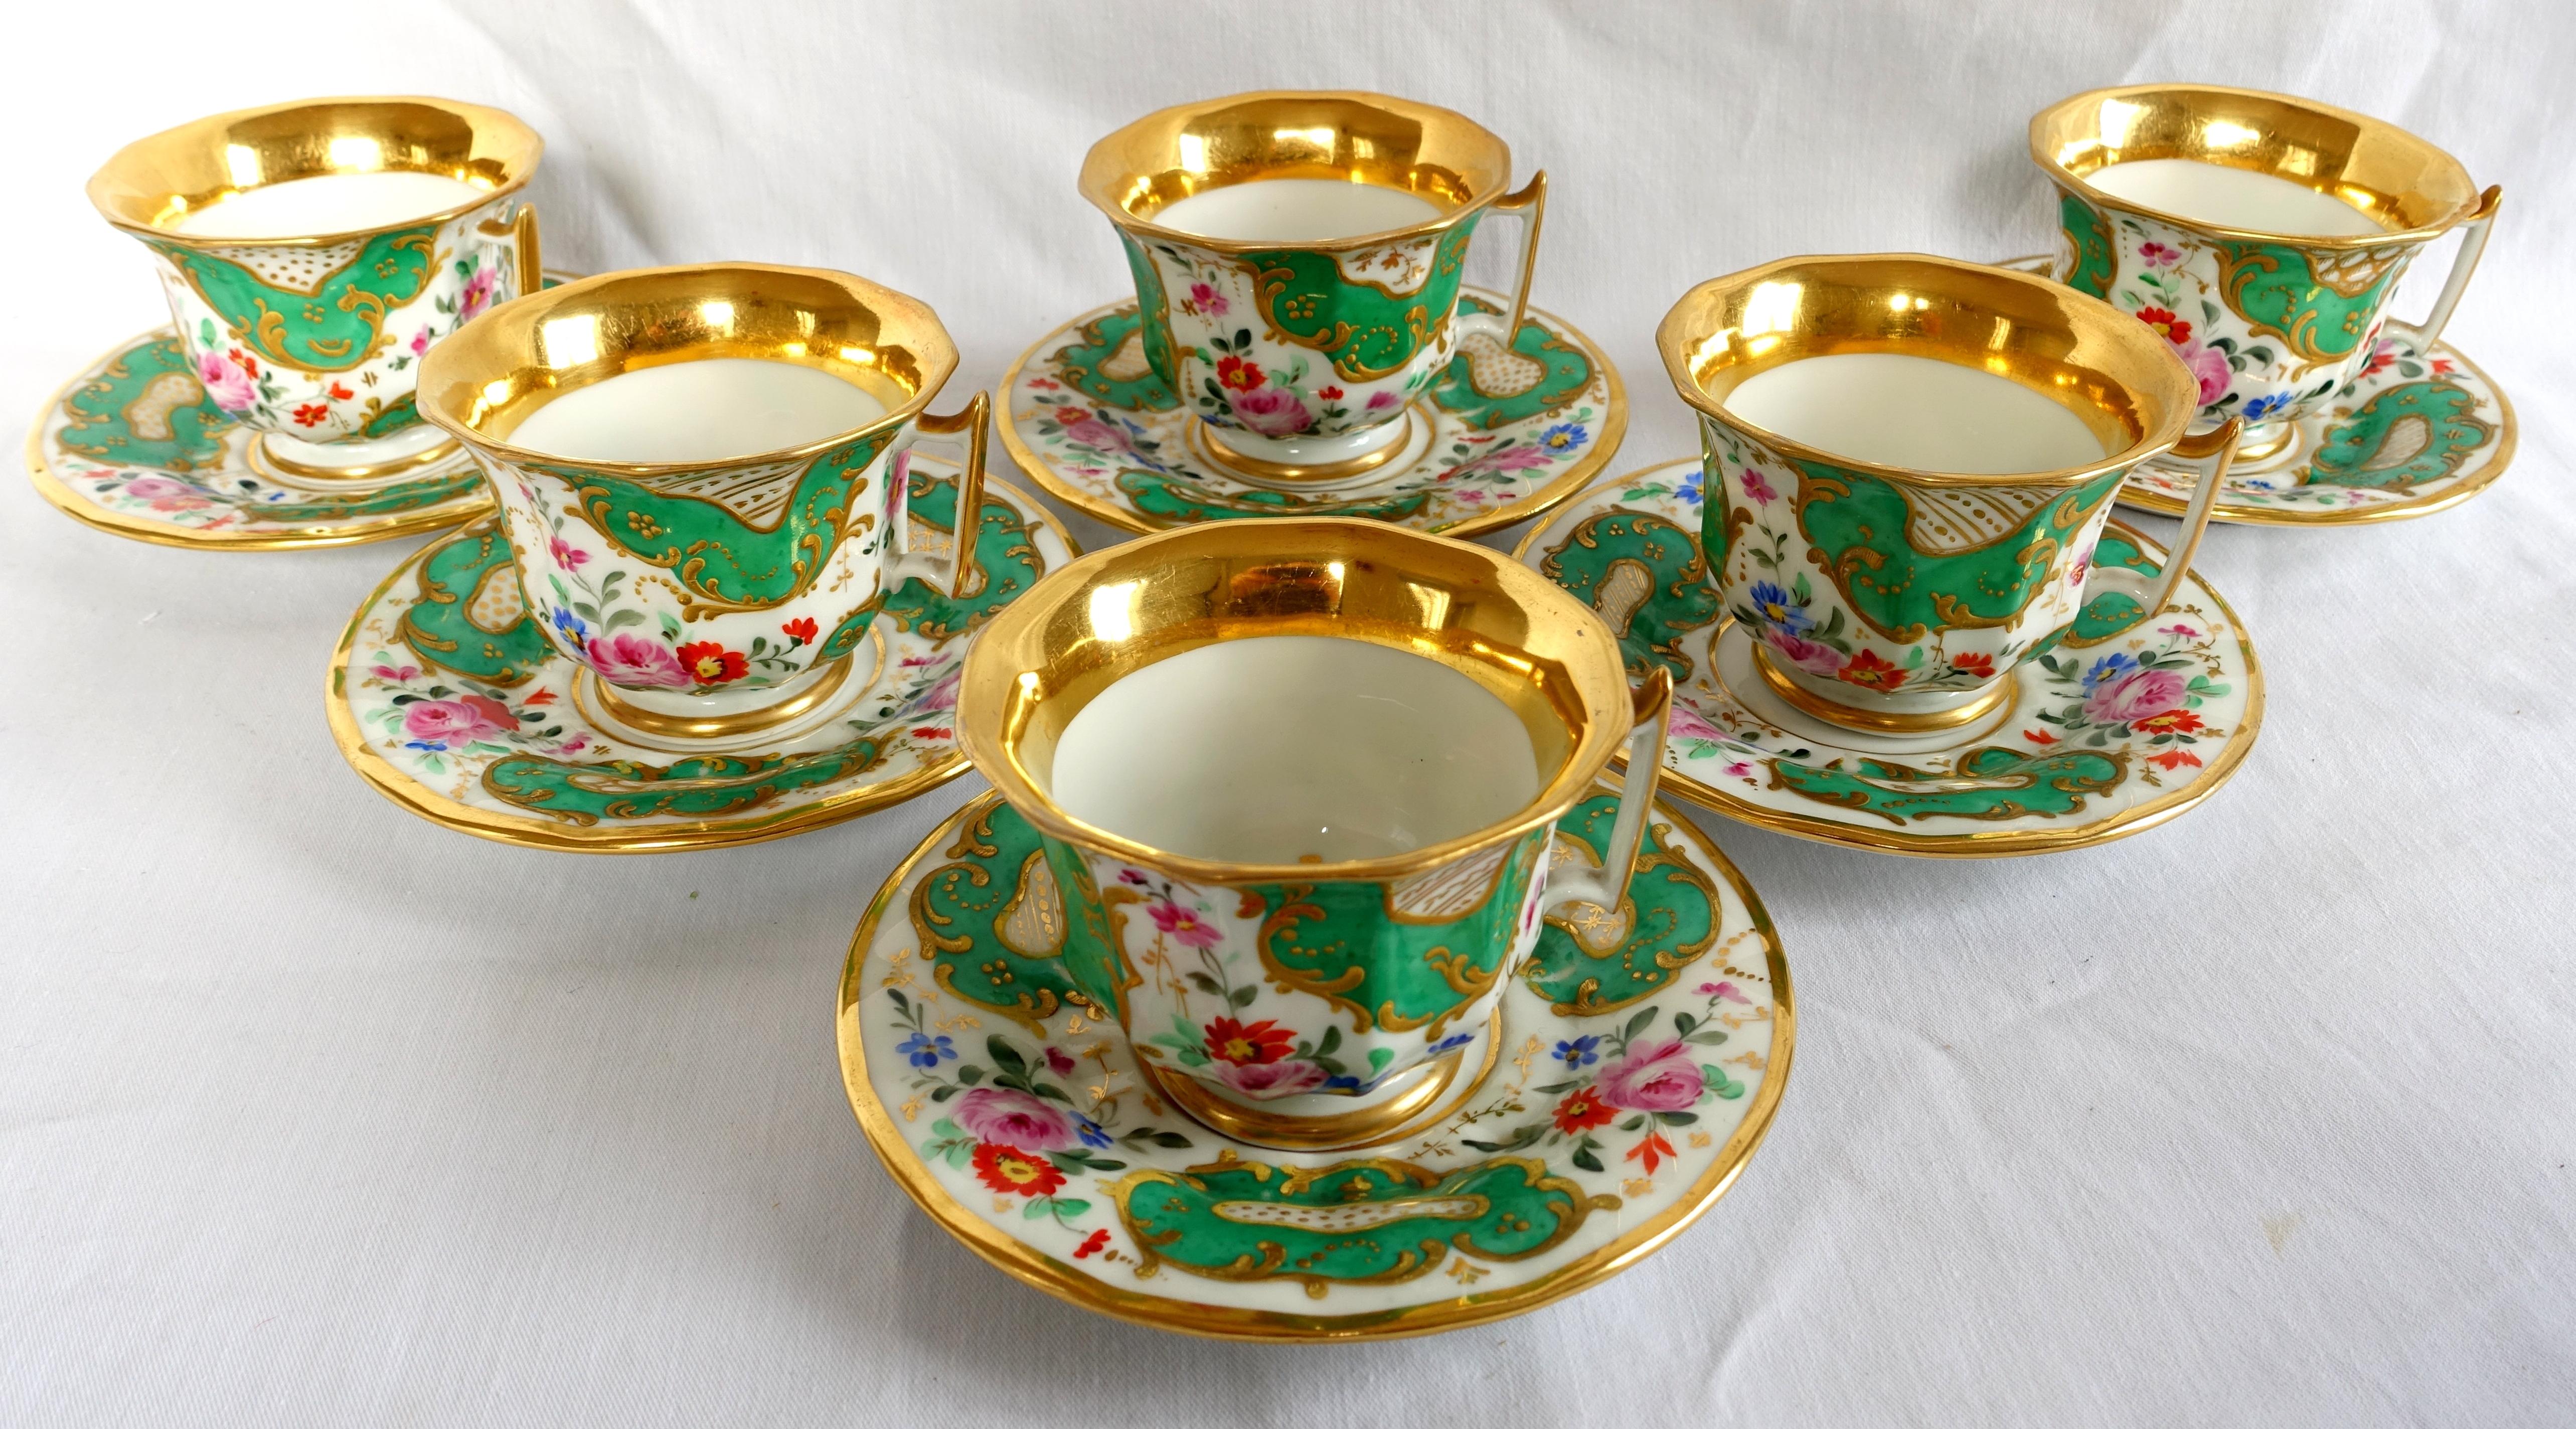 Antique French Paris porcelain coffee or tea set for 6 guests composed of 6 coffee cups and their saucer. Large format for XL coffees or teatime.
Beautiful polychromatic model decorated with flowers and green cartouches enhanced with fine gold gilt,